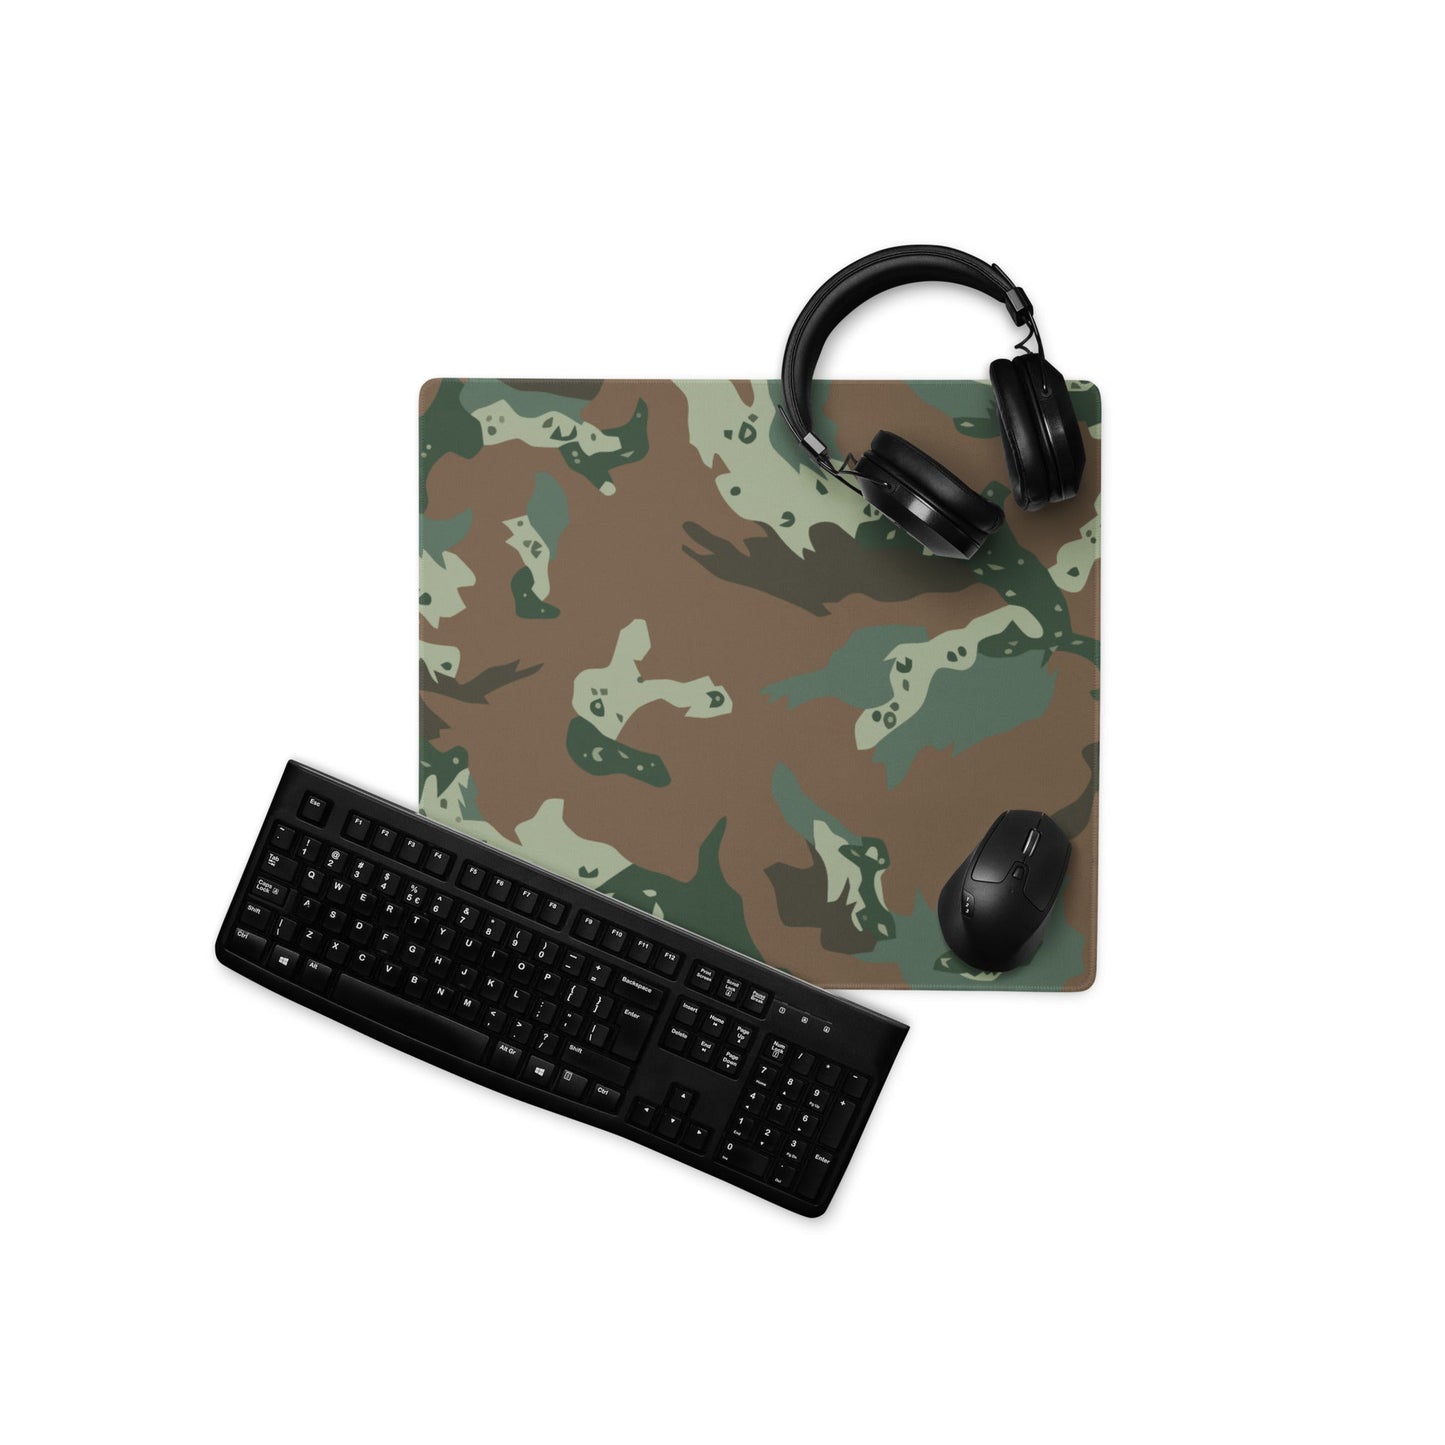 South African Soldier 2000 CAMO Gaming mouse pad - 18″×16″